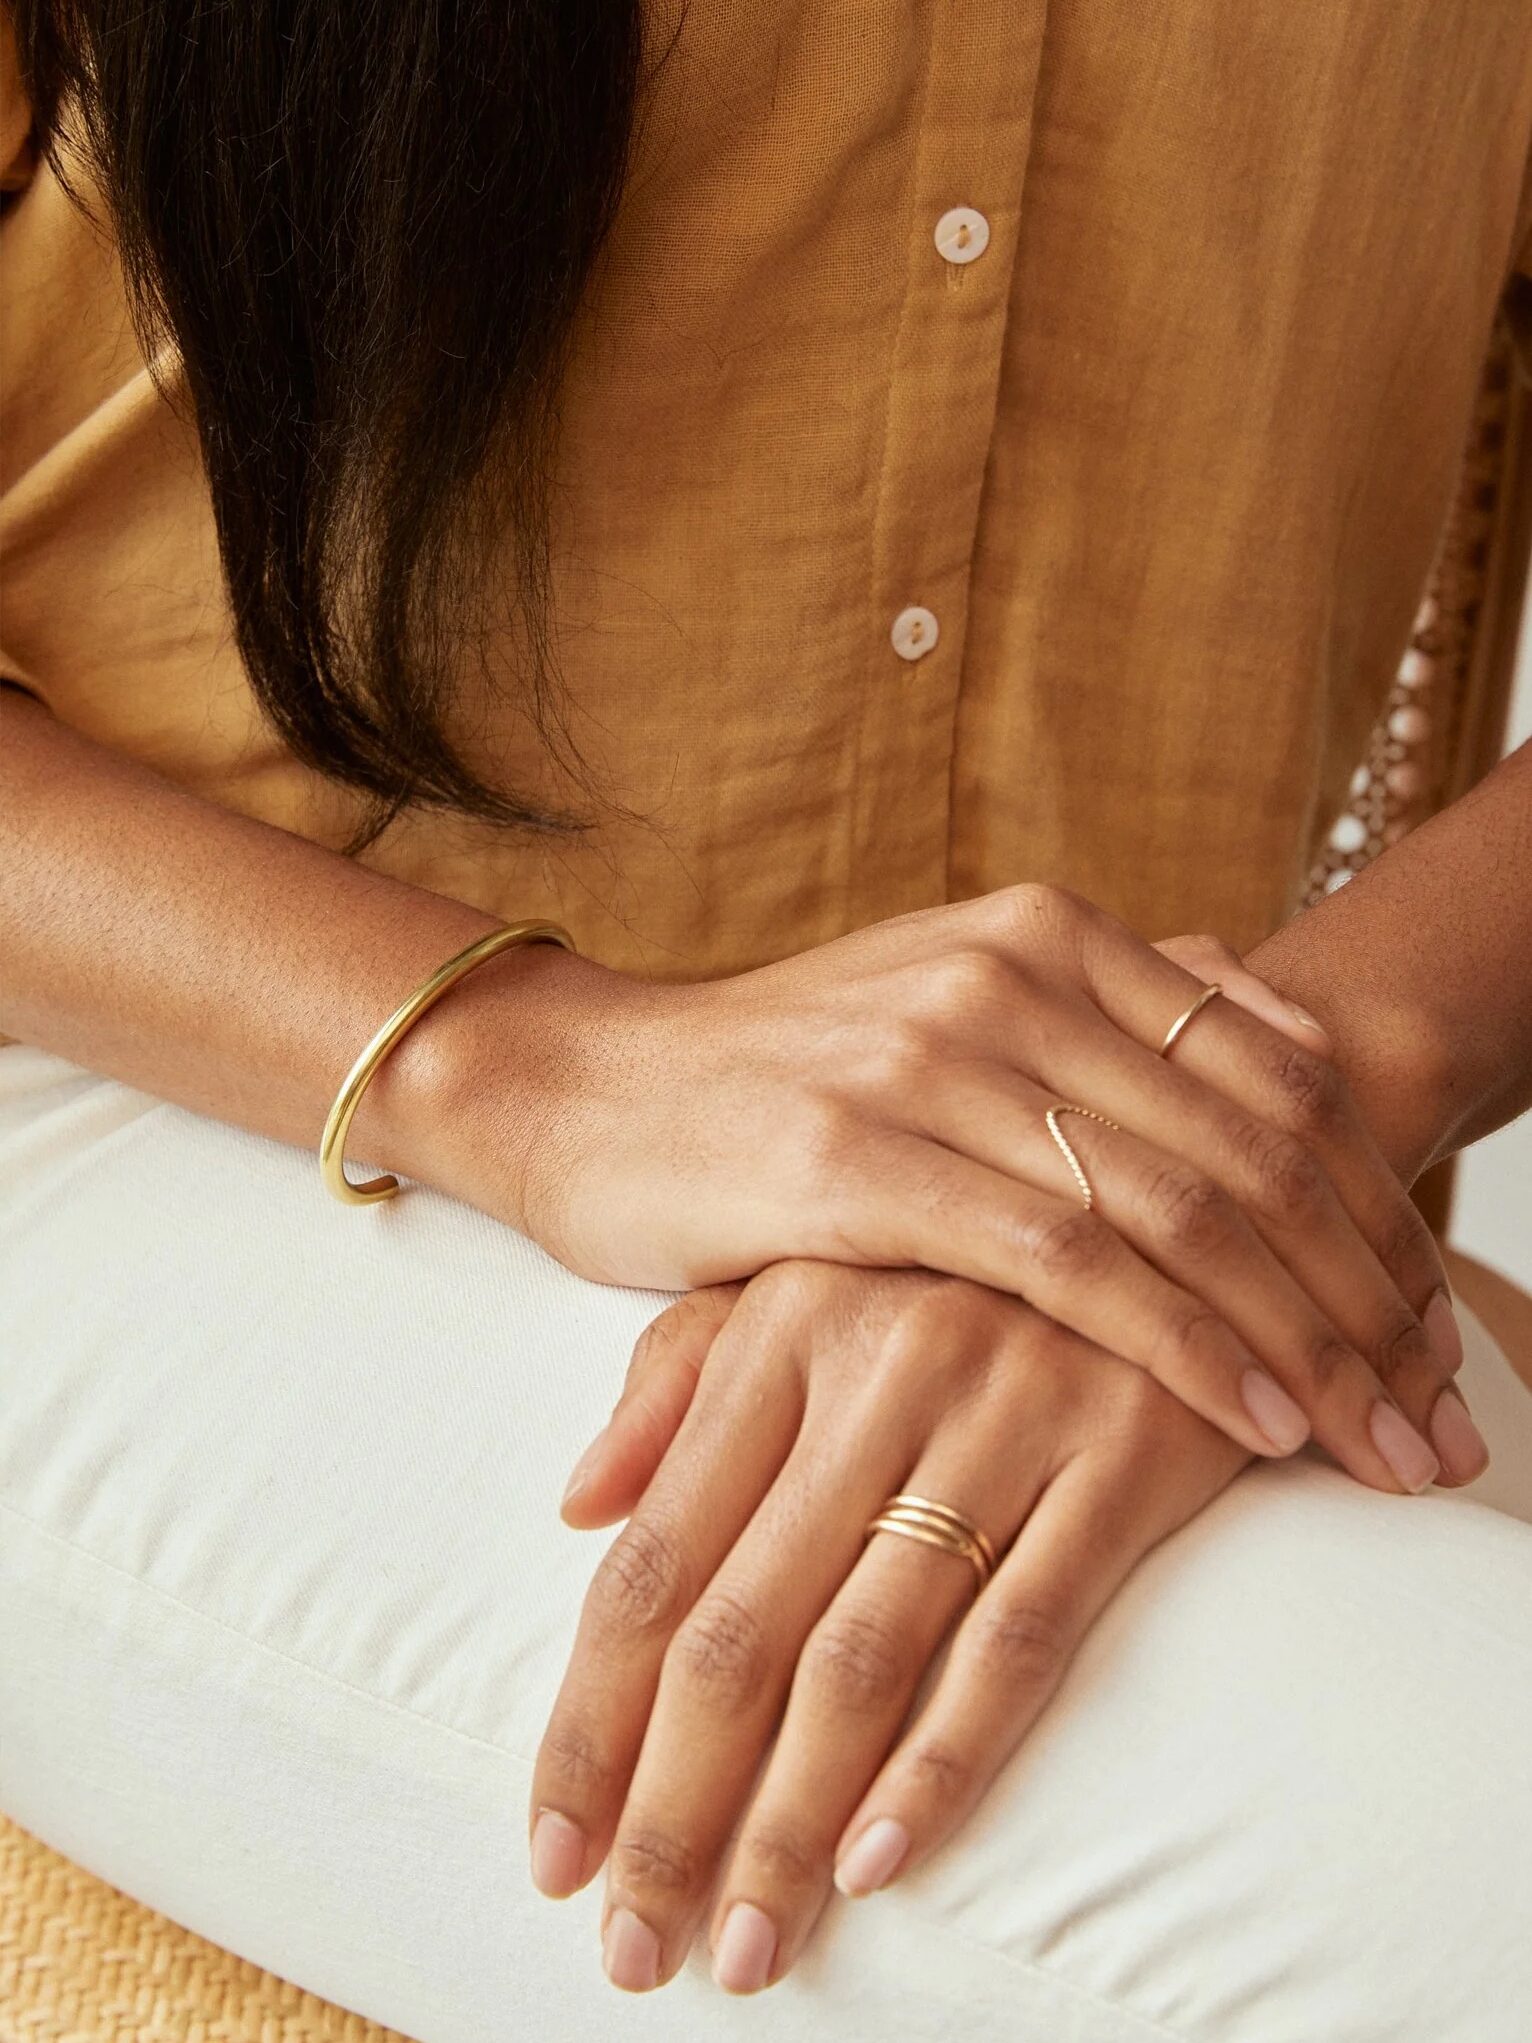 A close-up of a woman's hands resting on her lap, featuring a gold bracelet and rings, with a mustard-colored shirt visible.